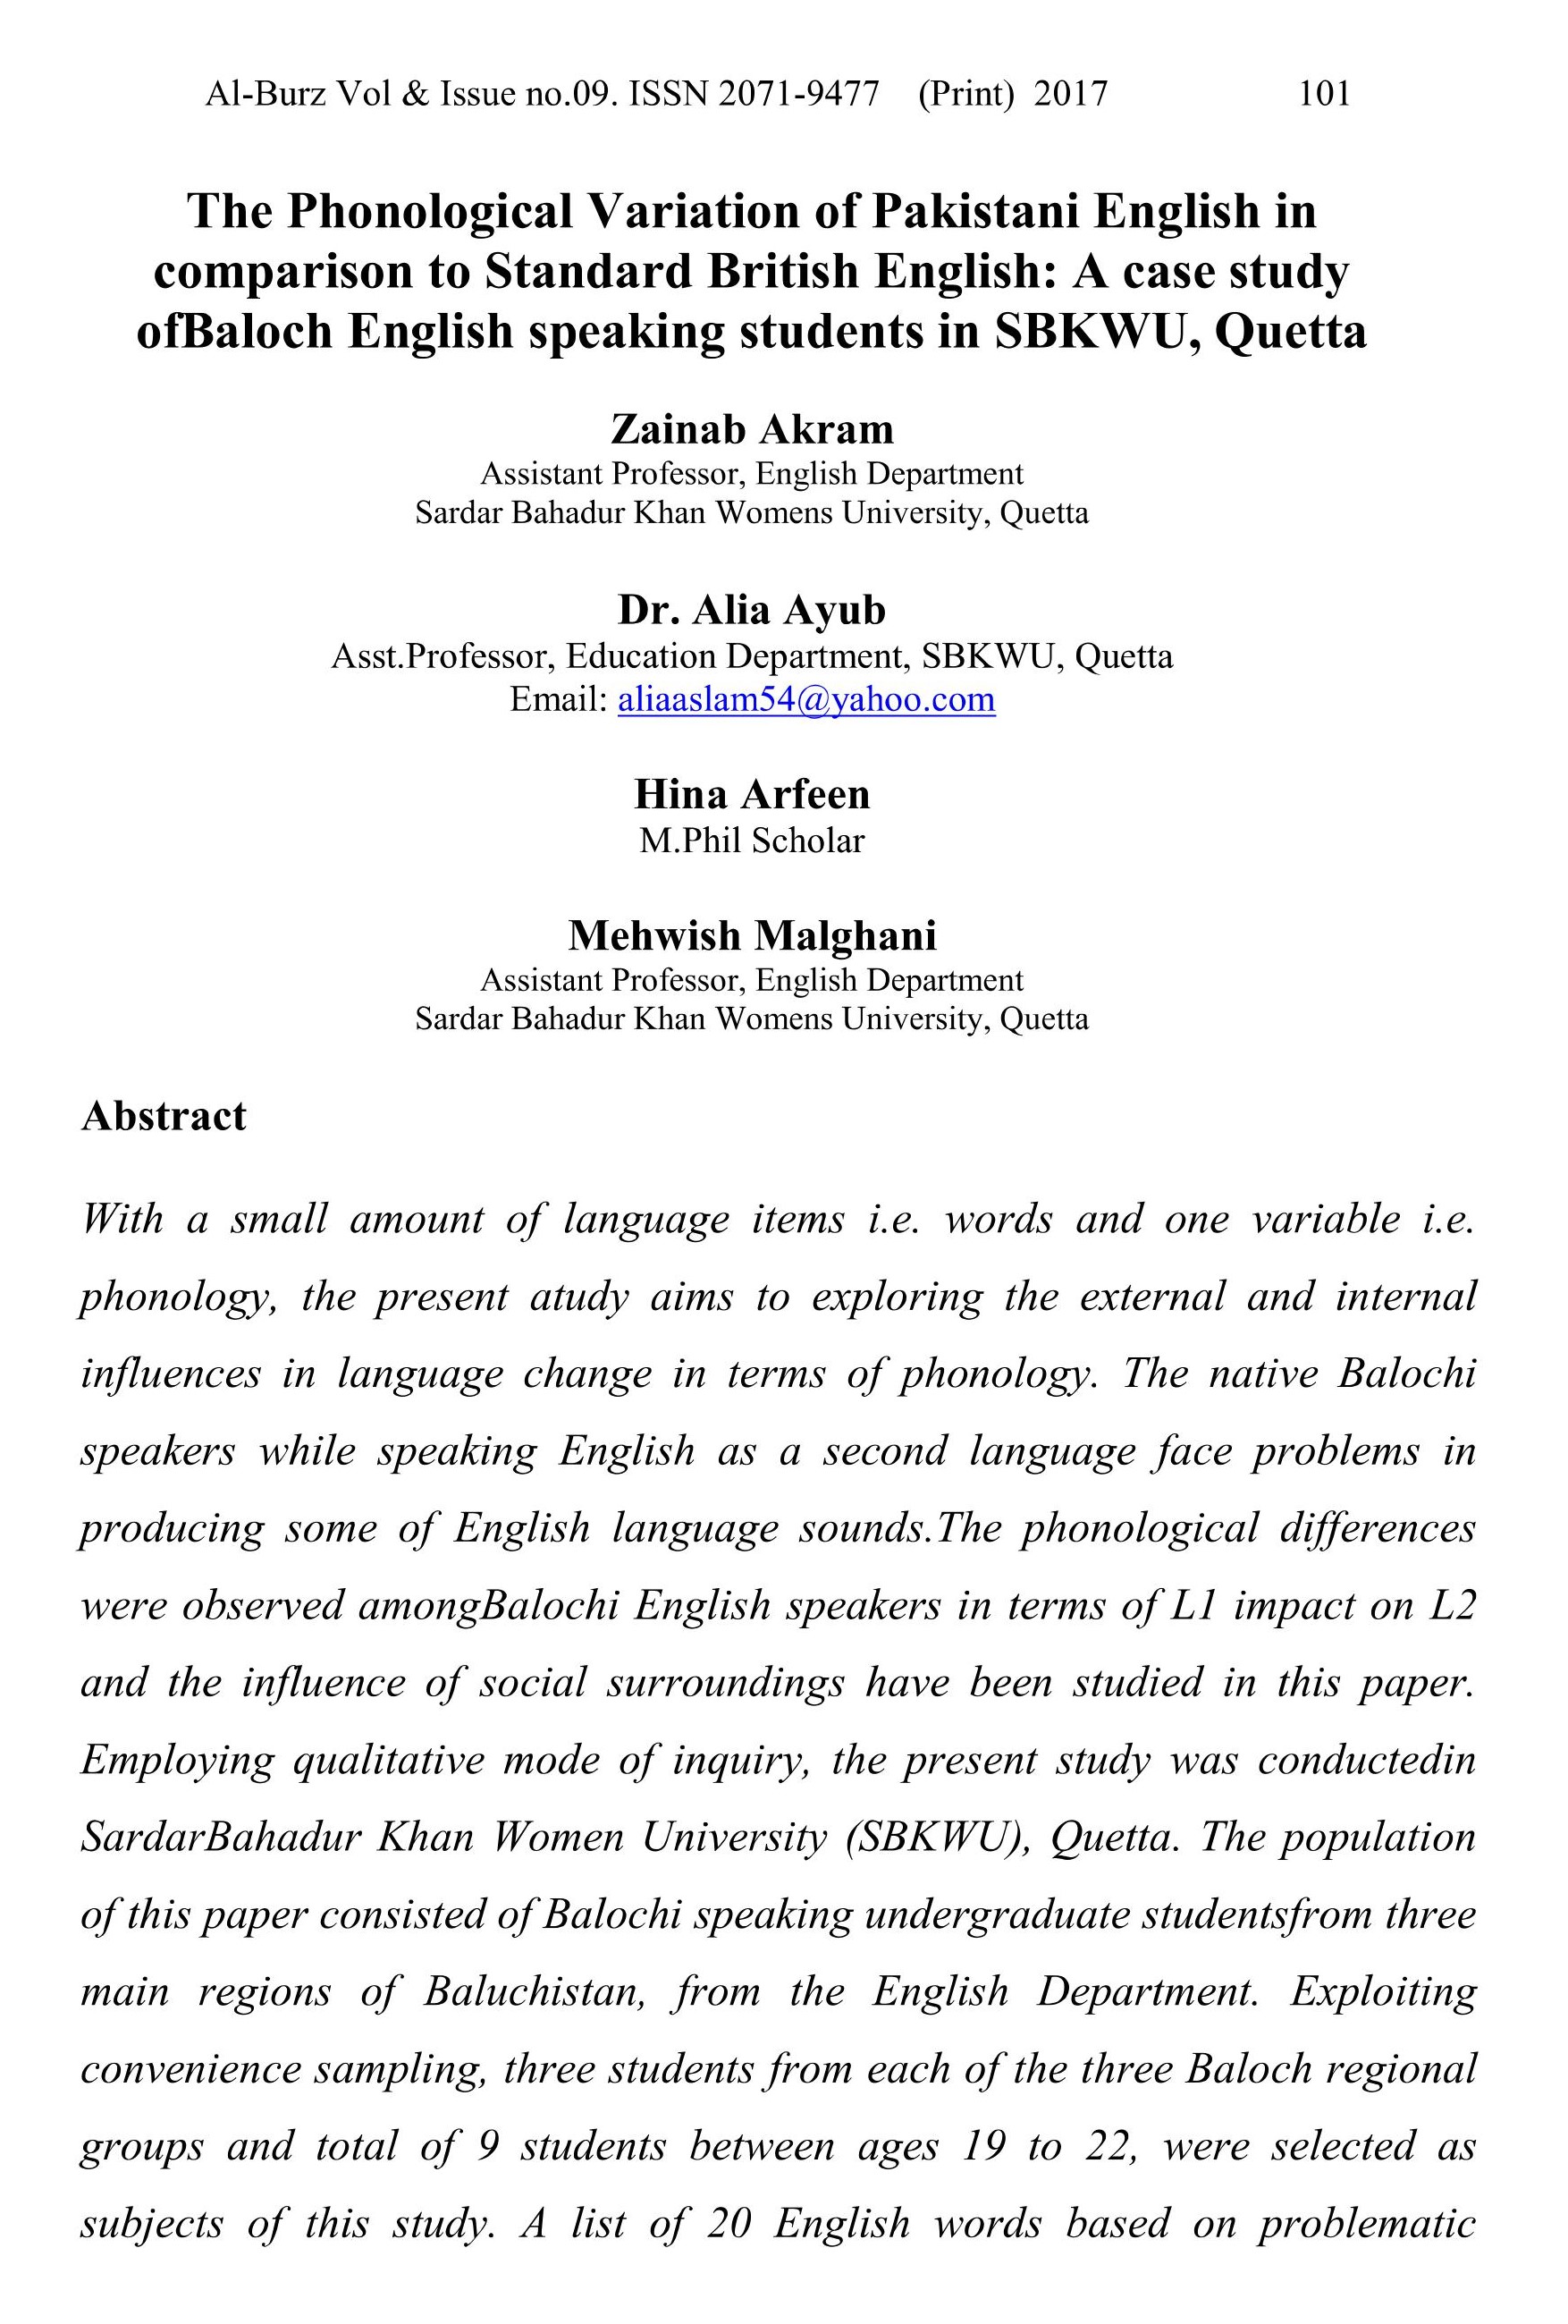 The Phonological Variation of Pakistani English in comparison to Standard British English: A case study ofBaloch English speaking students in SBKWU, Quetta